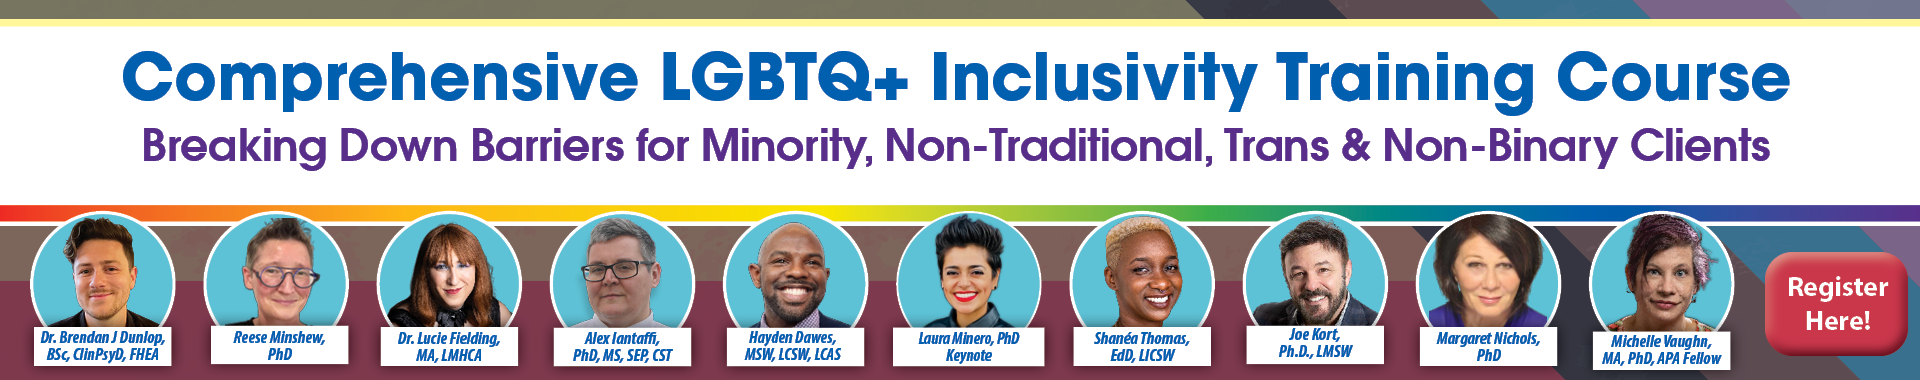 Comprehensive LGBTQ+ Inclusivity Training Course: Breaking Down Barriers for Minority, Non-Traditional, Trans & Non-Binary Clients